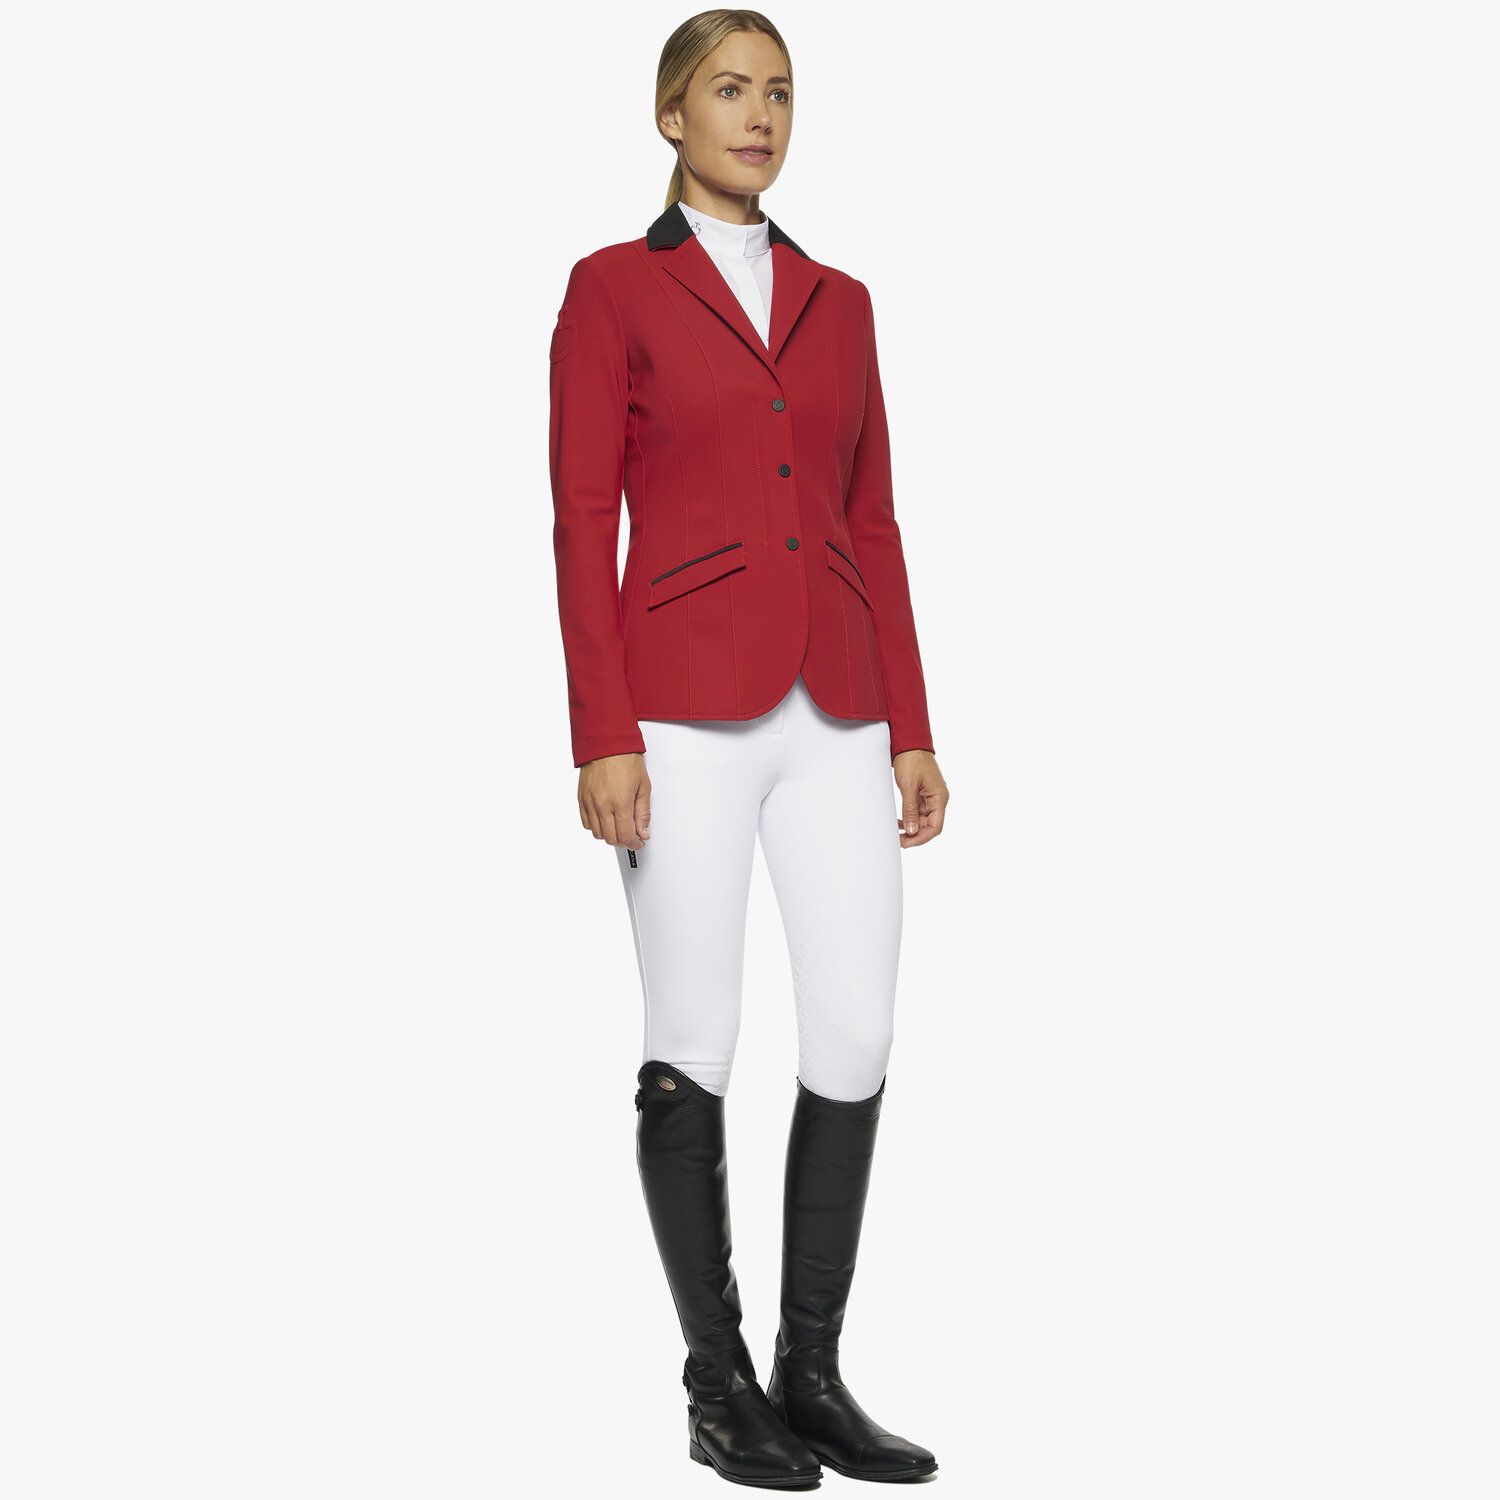 Cavalleria Toscana Women's zip and buttons riding jacket RED-2